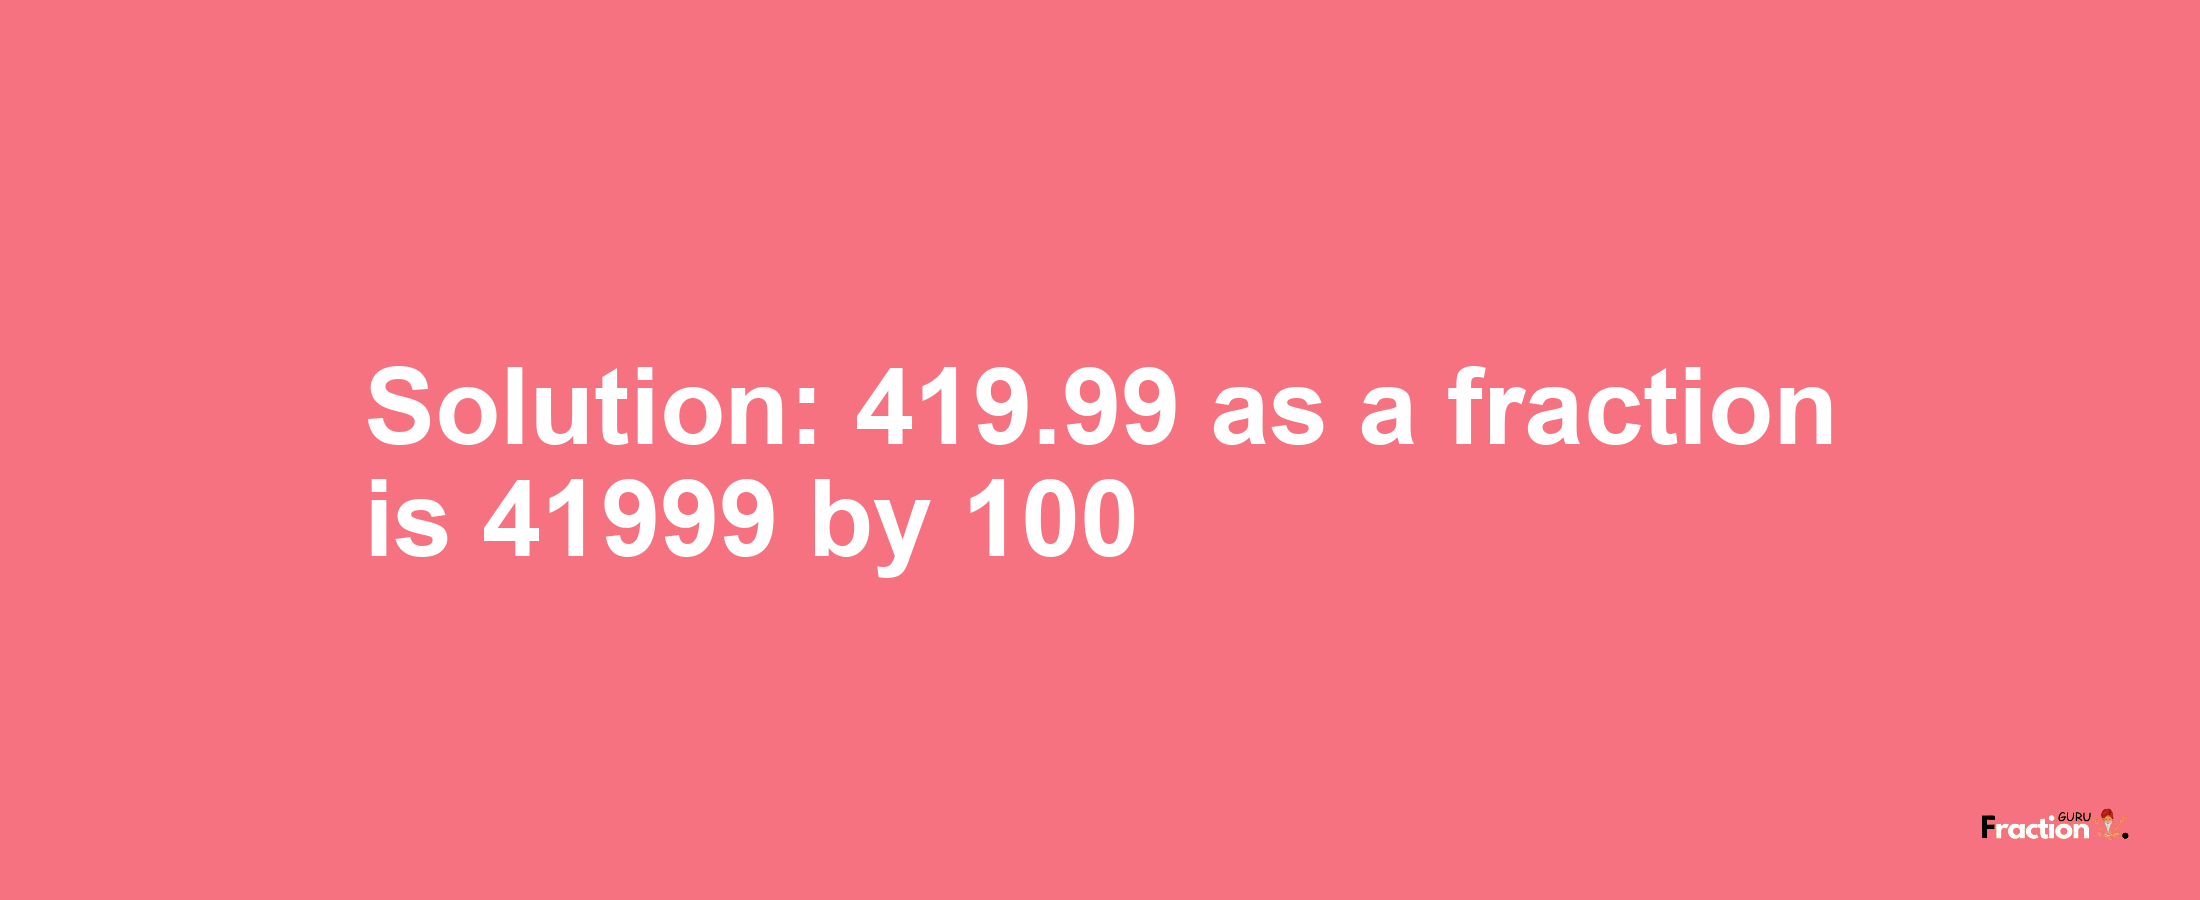 Solution:419.99 as a fraction is 41999/100